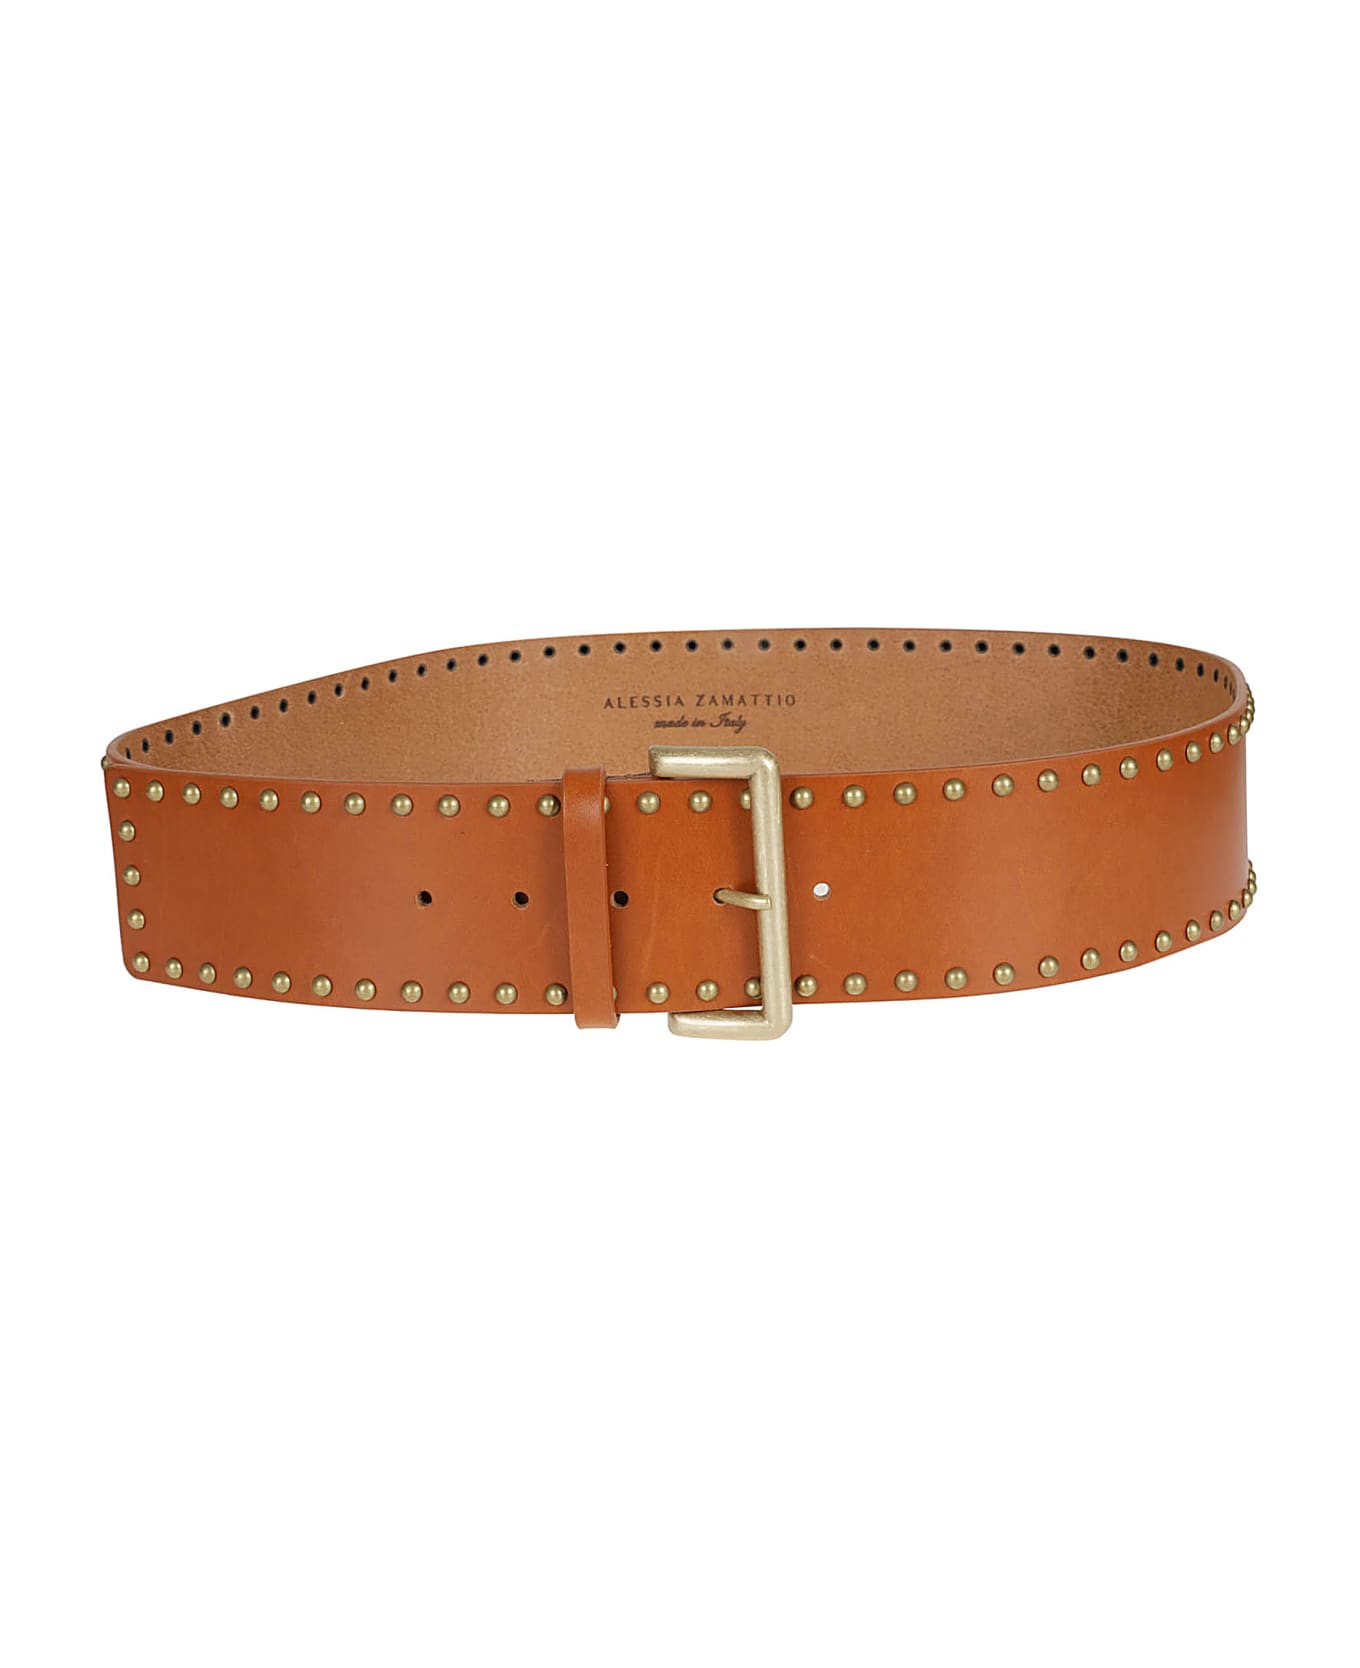 Zamattio Alessia  Belts Leather Brown - Leather Brown